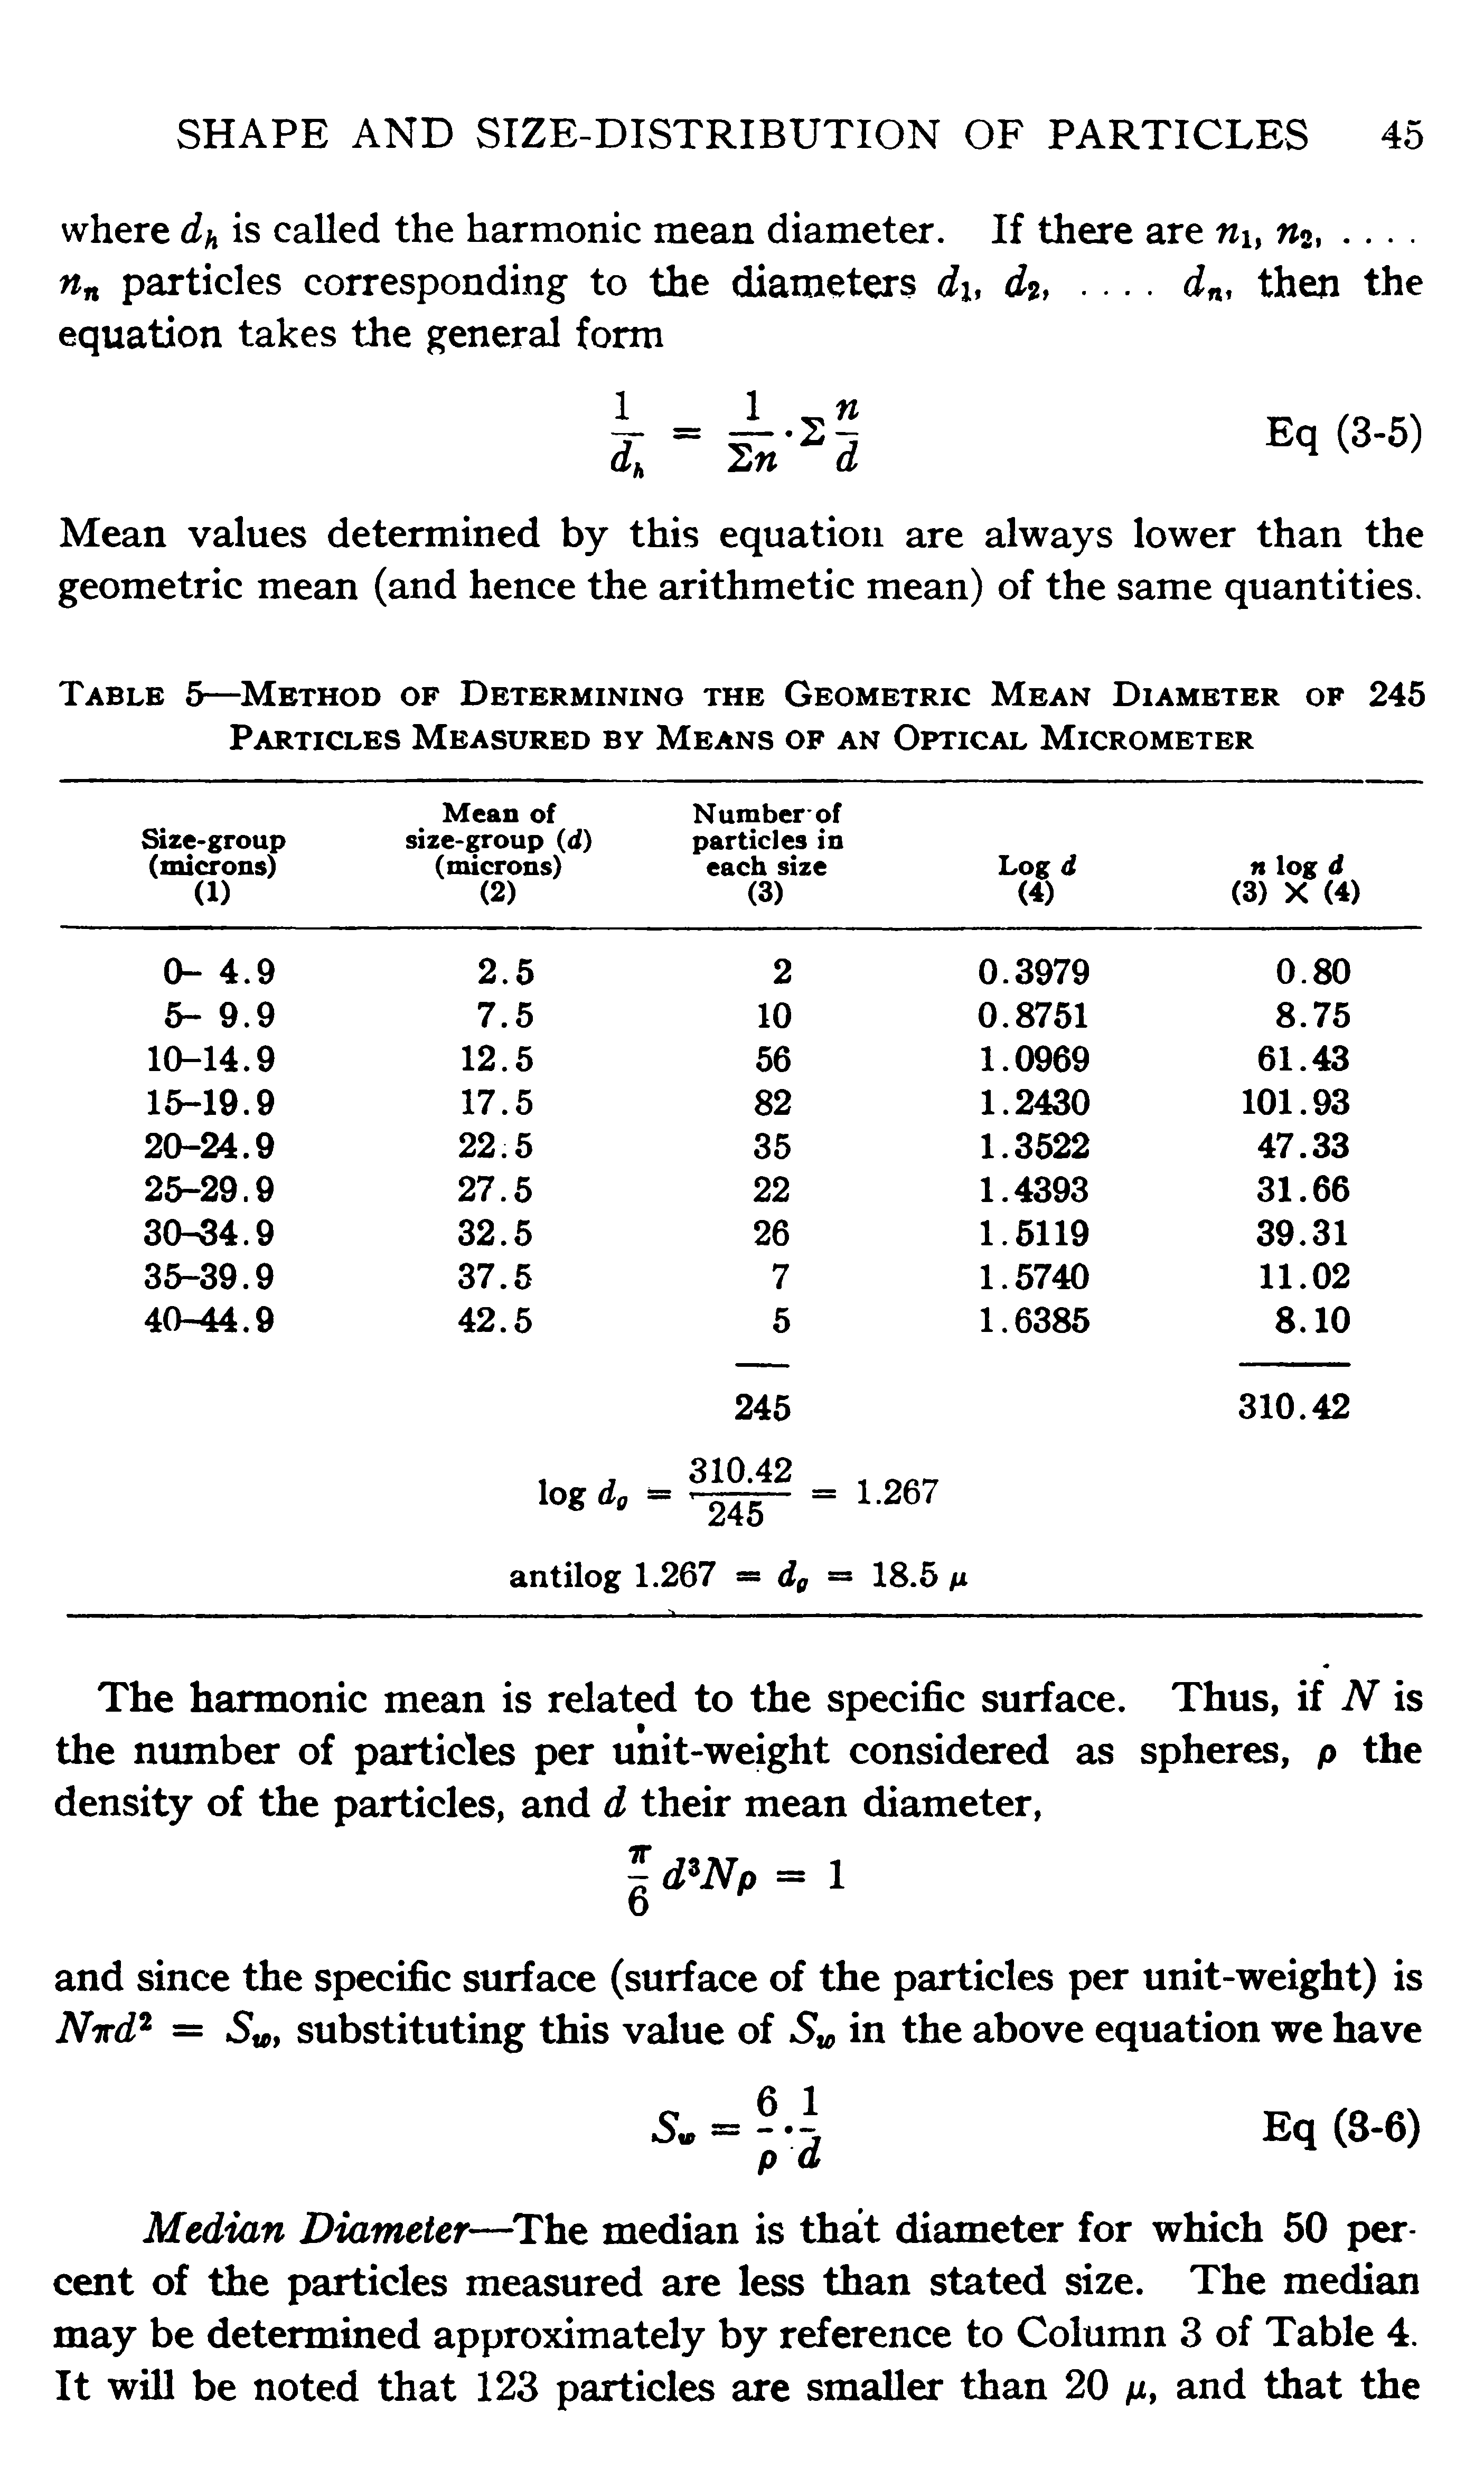 Table 5—Method of Determining the Geometric Mean Diameter of 245 Particles Measured by Means of an Optical Micrometer...